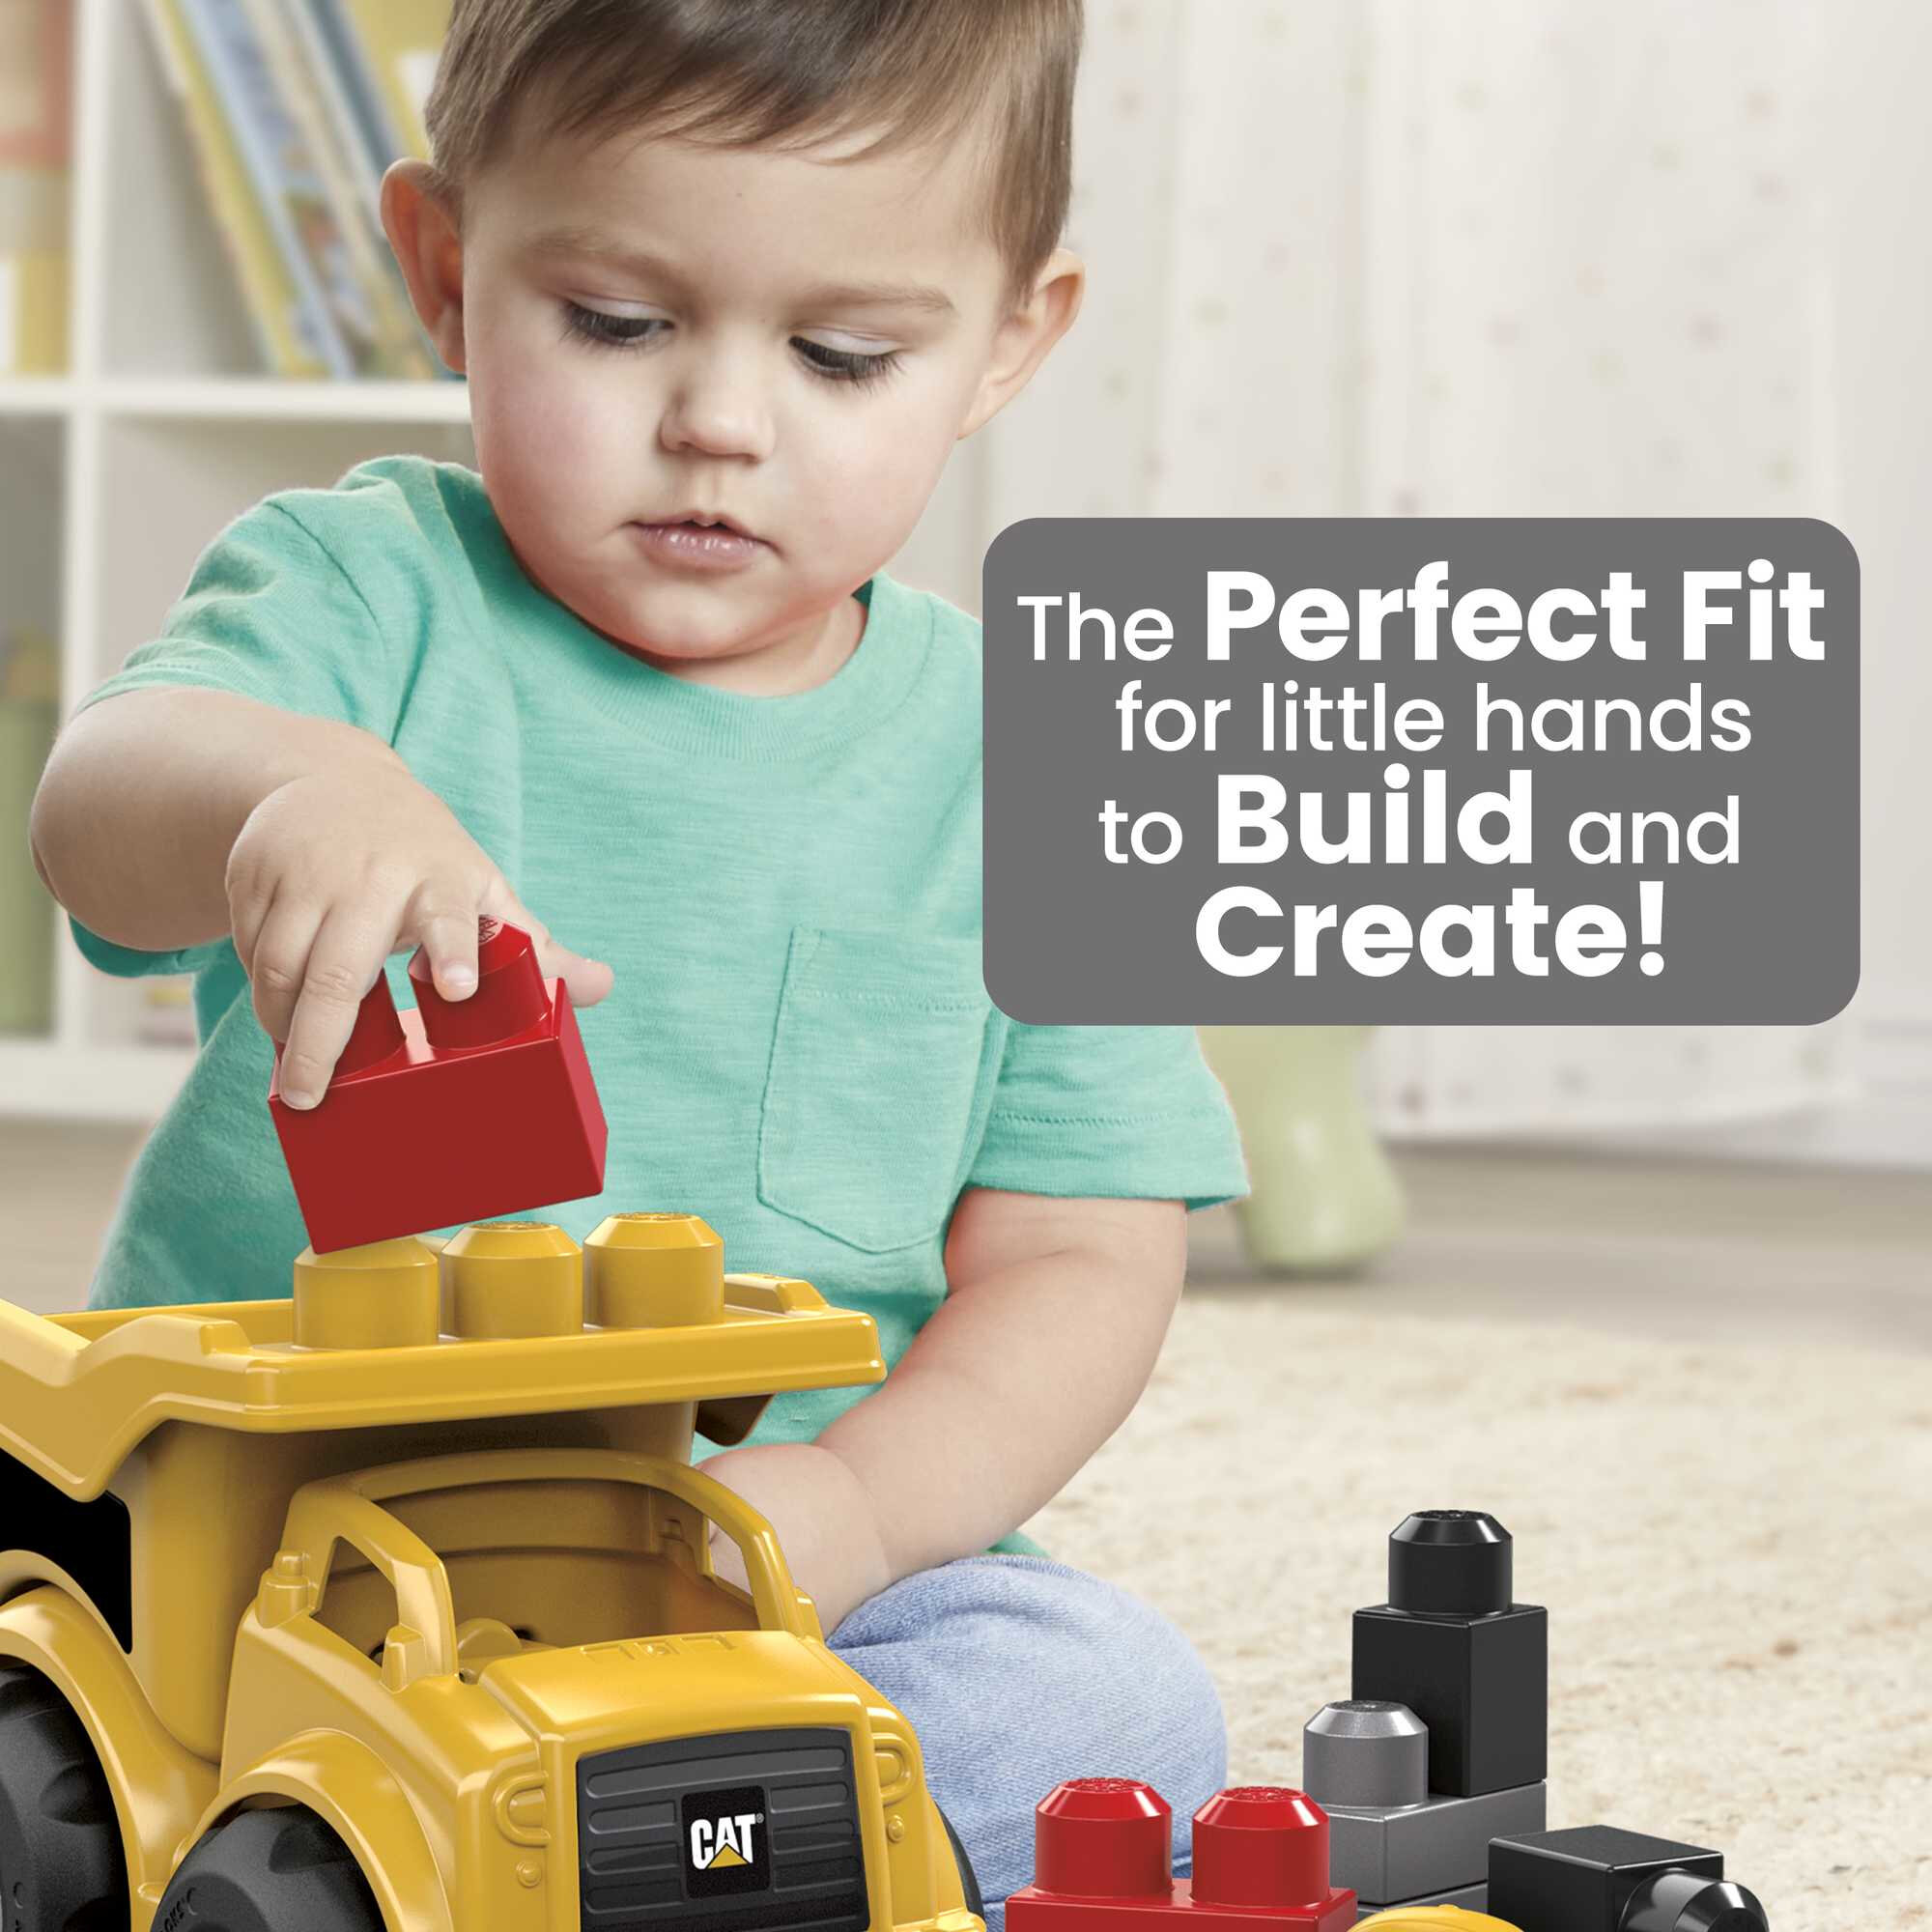 MEGA BLOKS Cat Building Toy Blocks Lil Dump Truck (7 Pieces) Fisher Price For Toddler - image 3 of 6